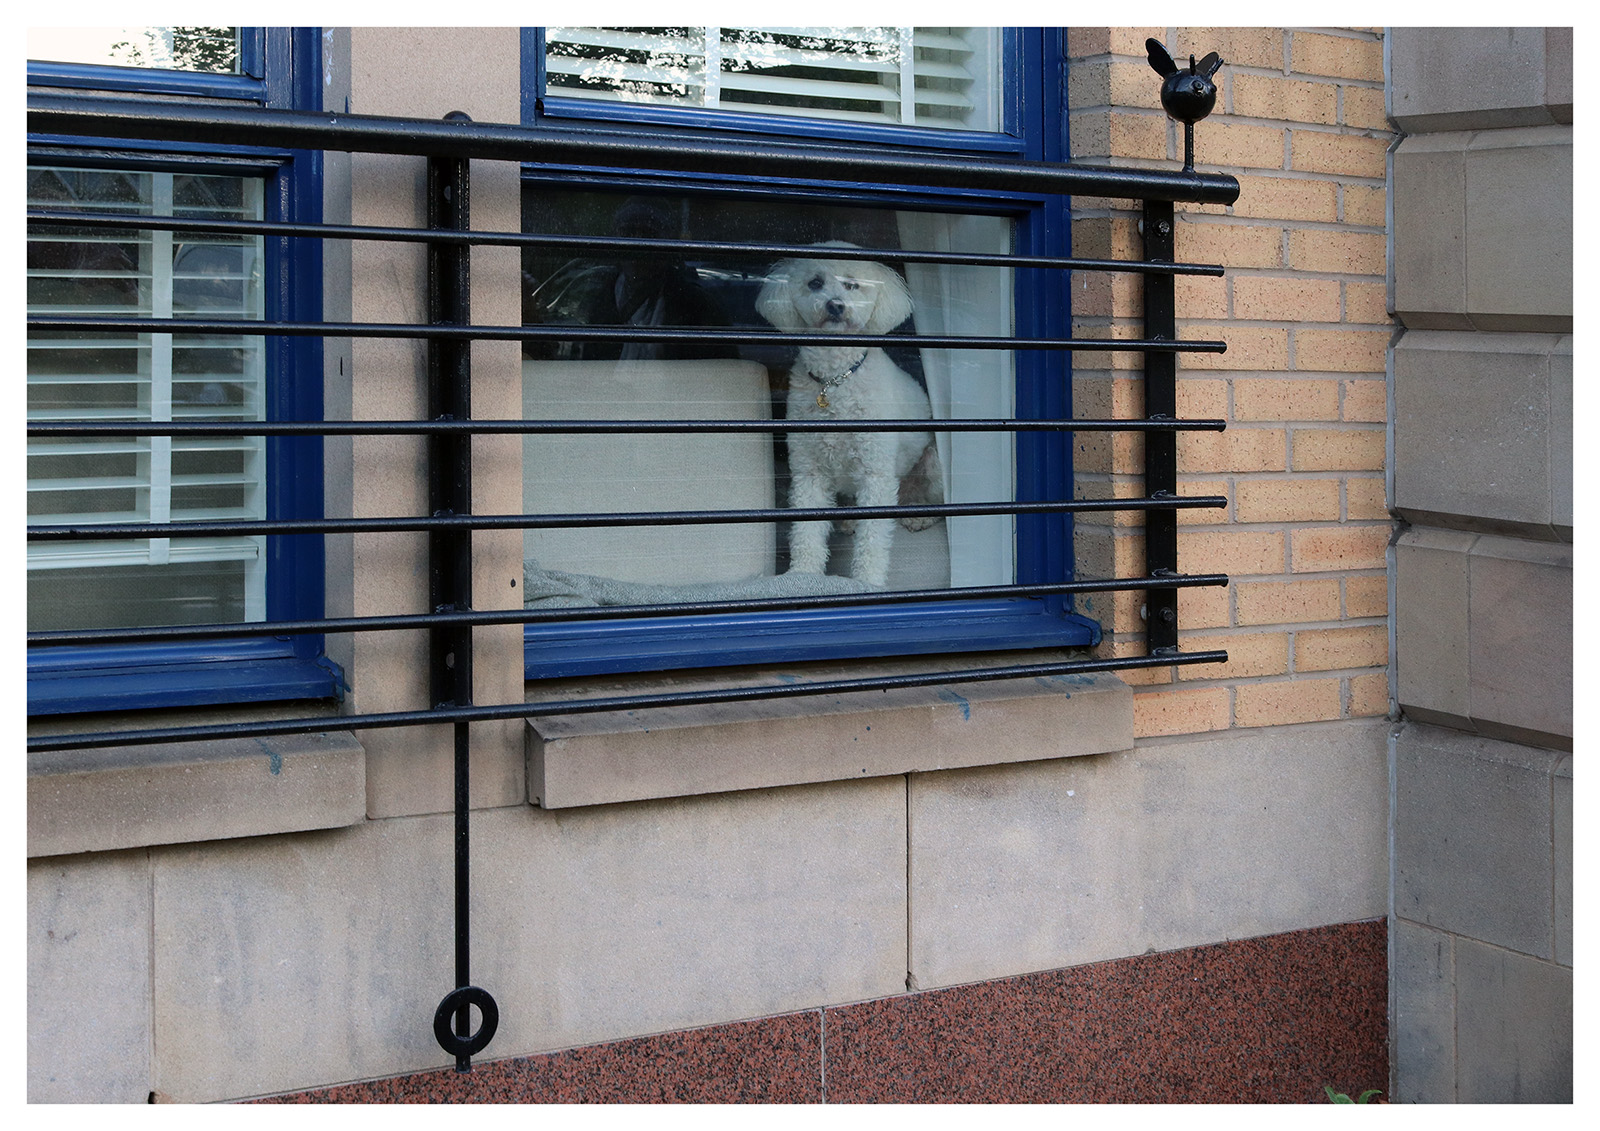 Dog in the Window 